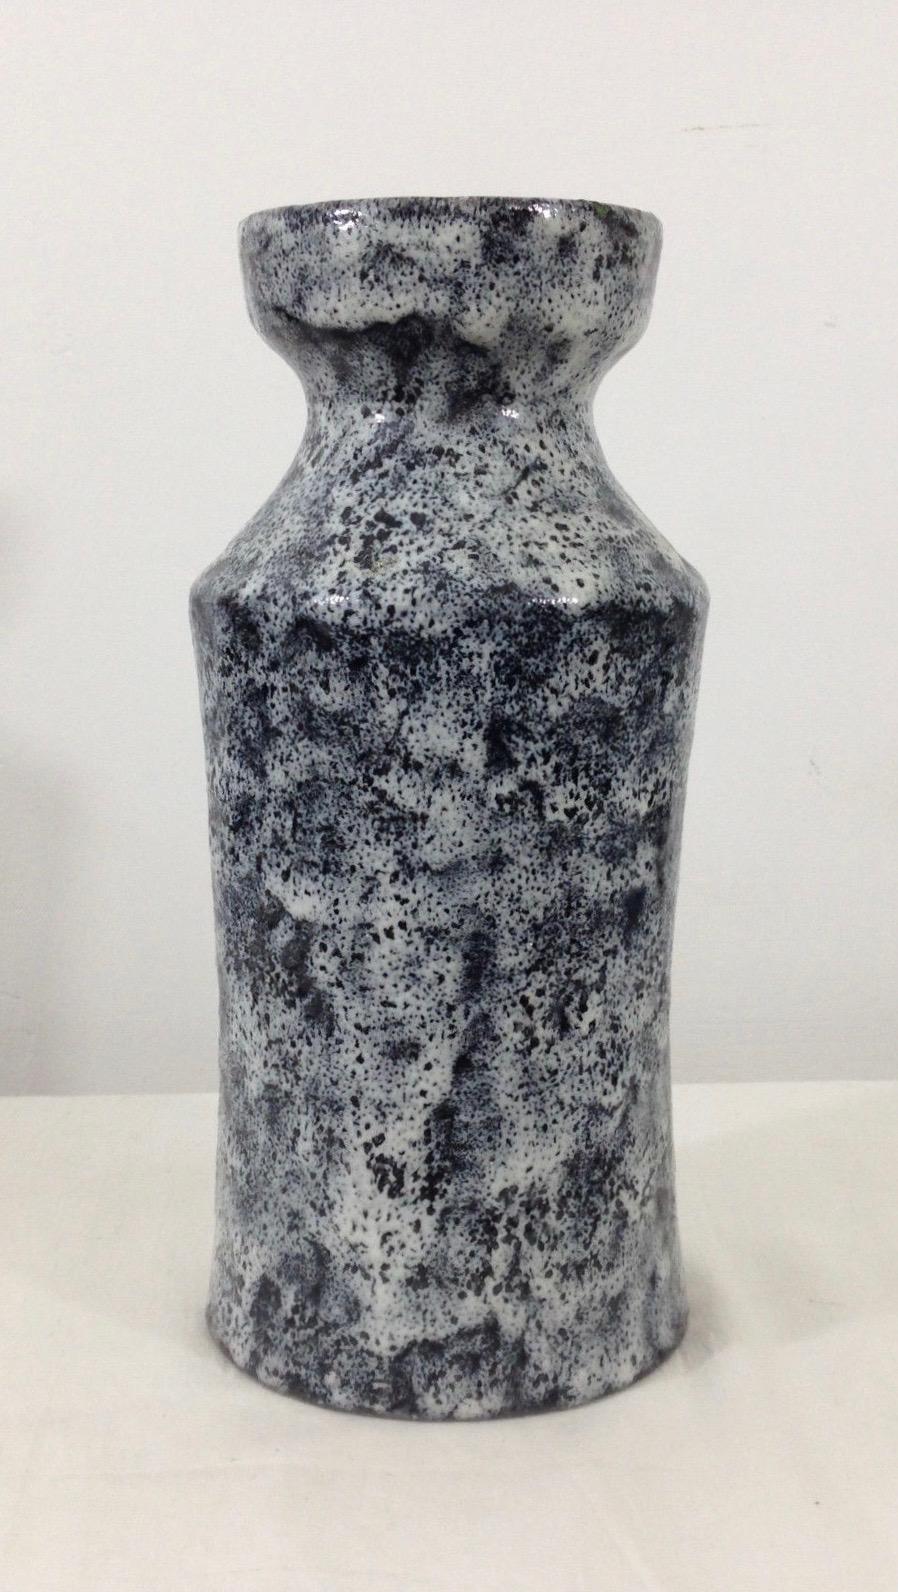 Beautiful ceramic vase by Raymor. Great lave glaze, with black and white coloring. Very good vintage condition.